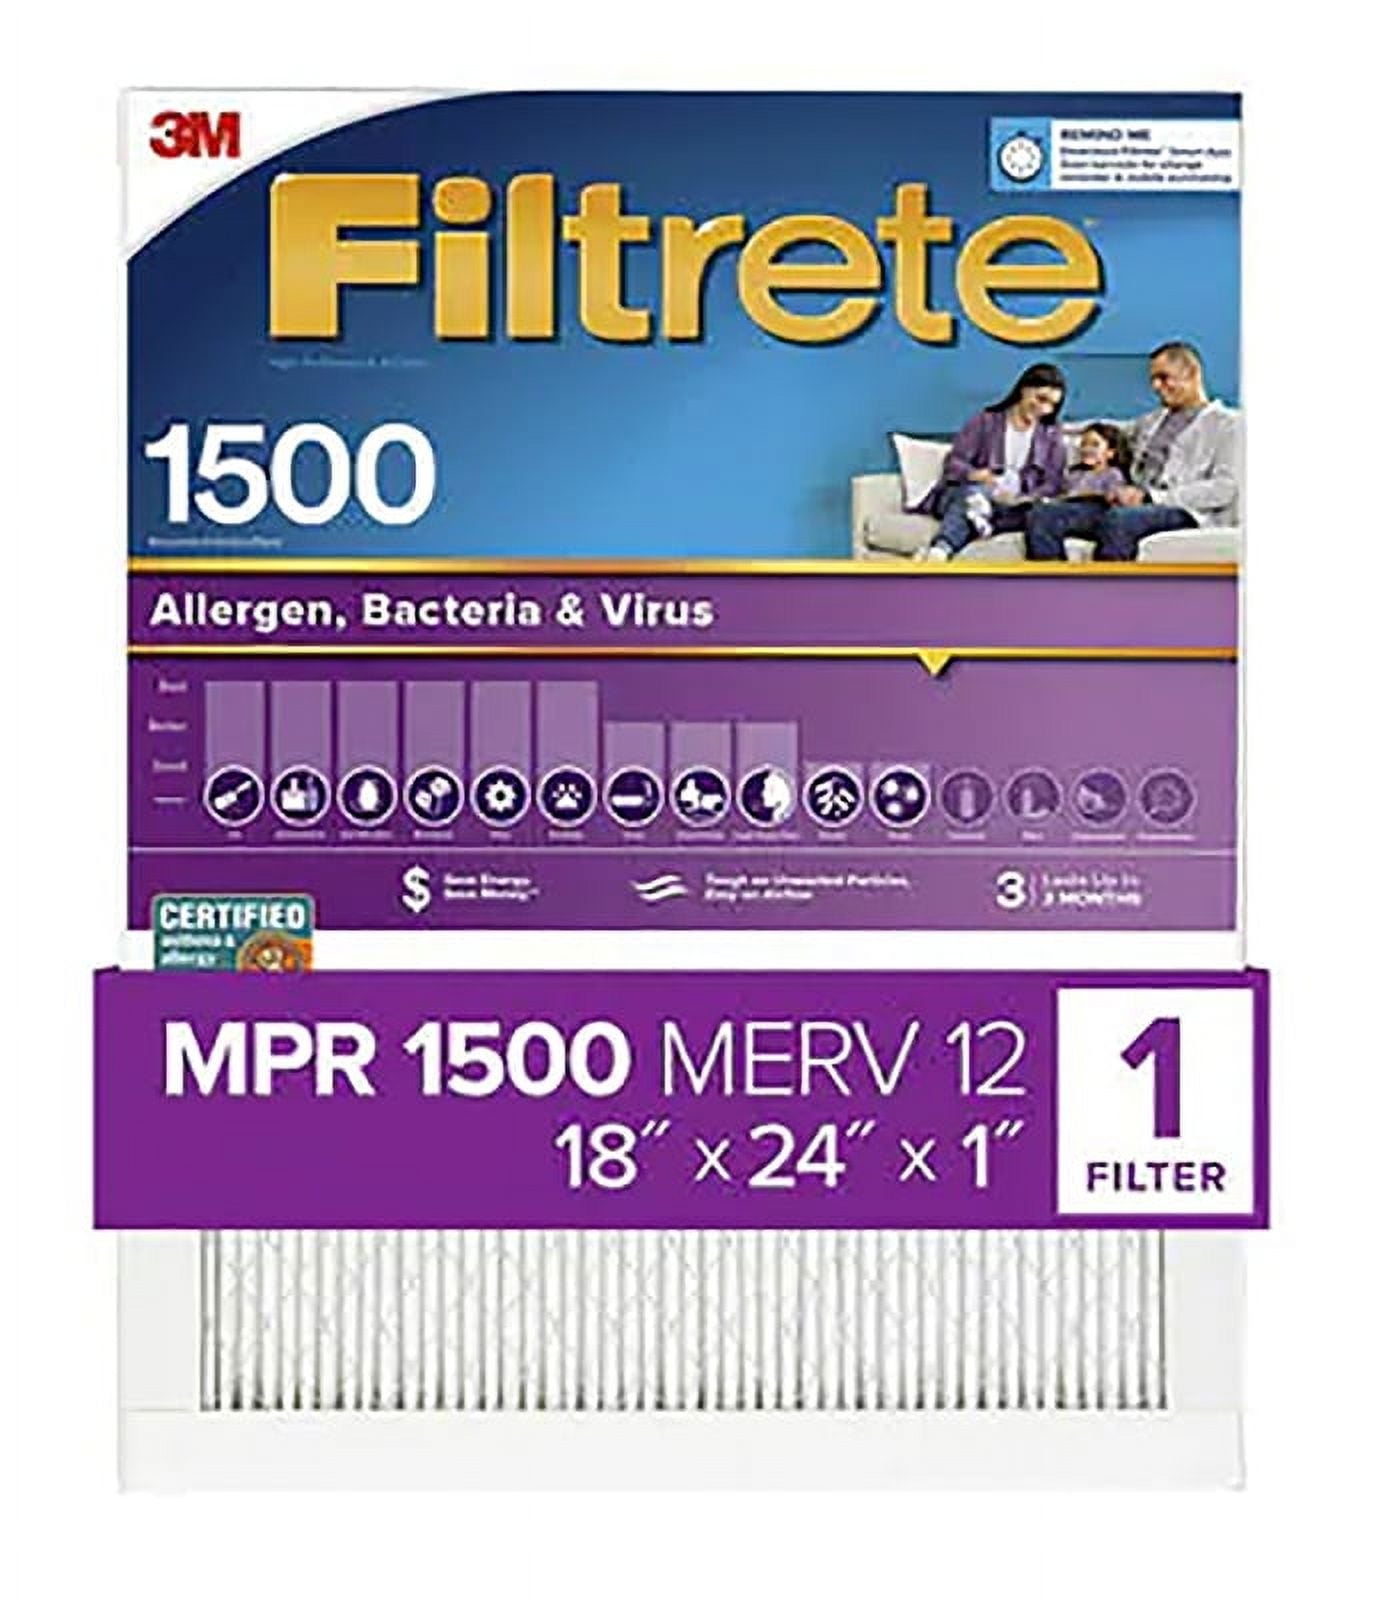 3M 2021DC-6 18 x 24 x 1 in. Filtrate Healthy Living Filter - 1500 MPR- pack of 4